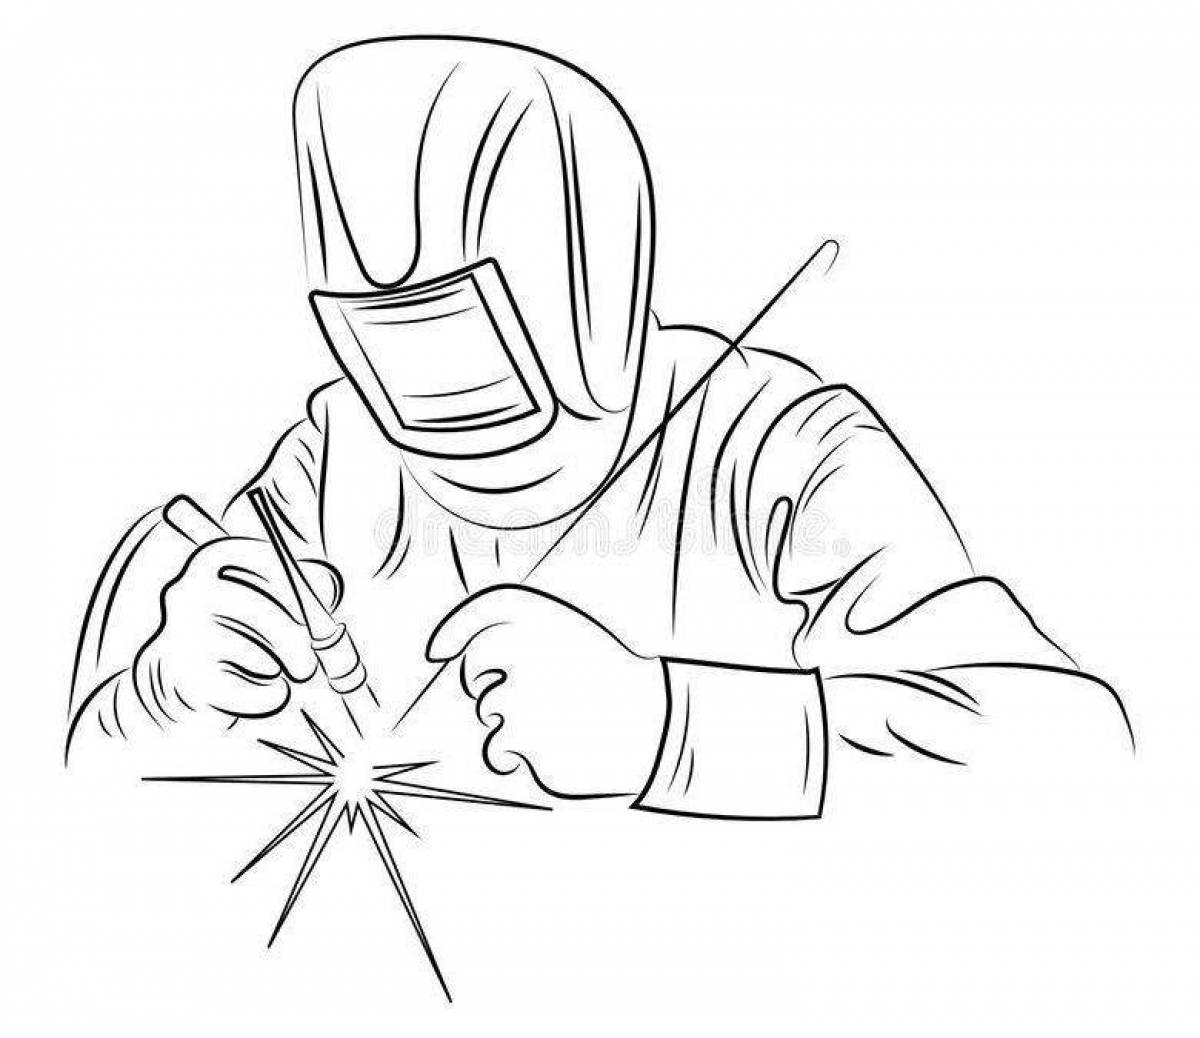 Magic welder coloring page